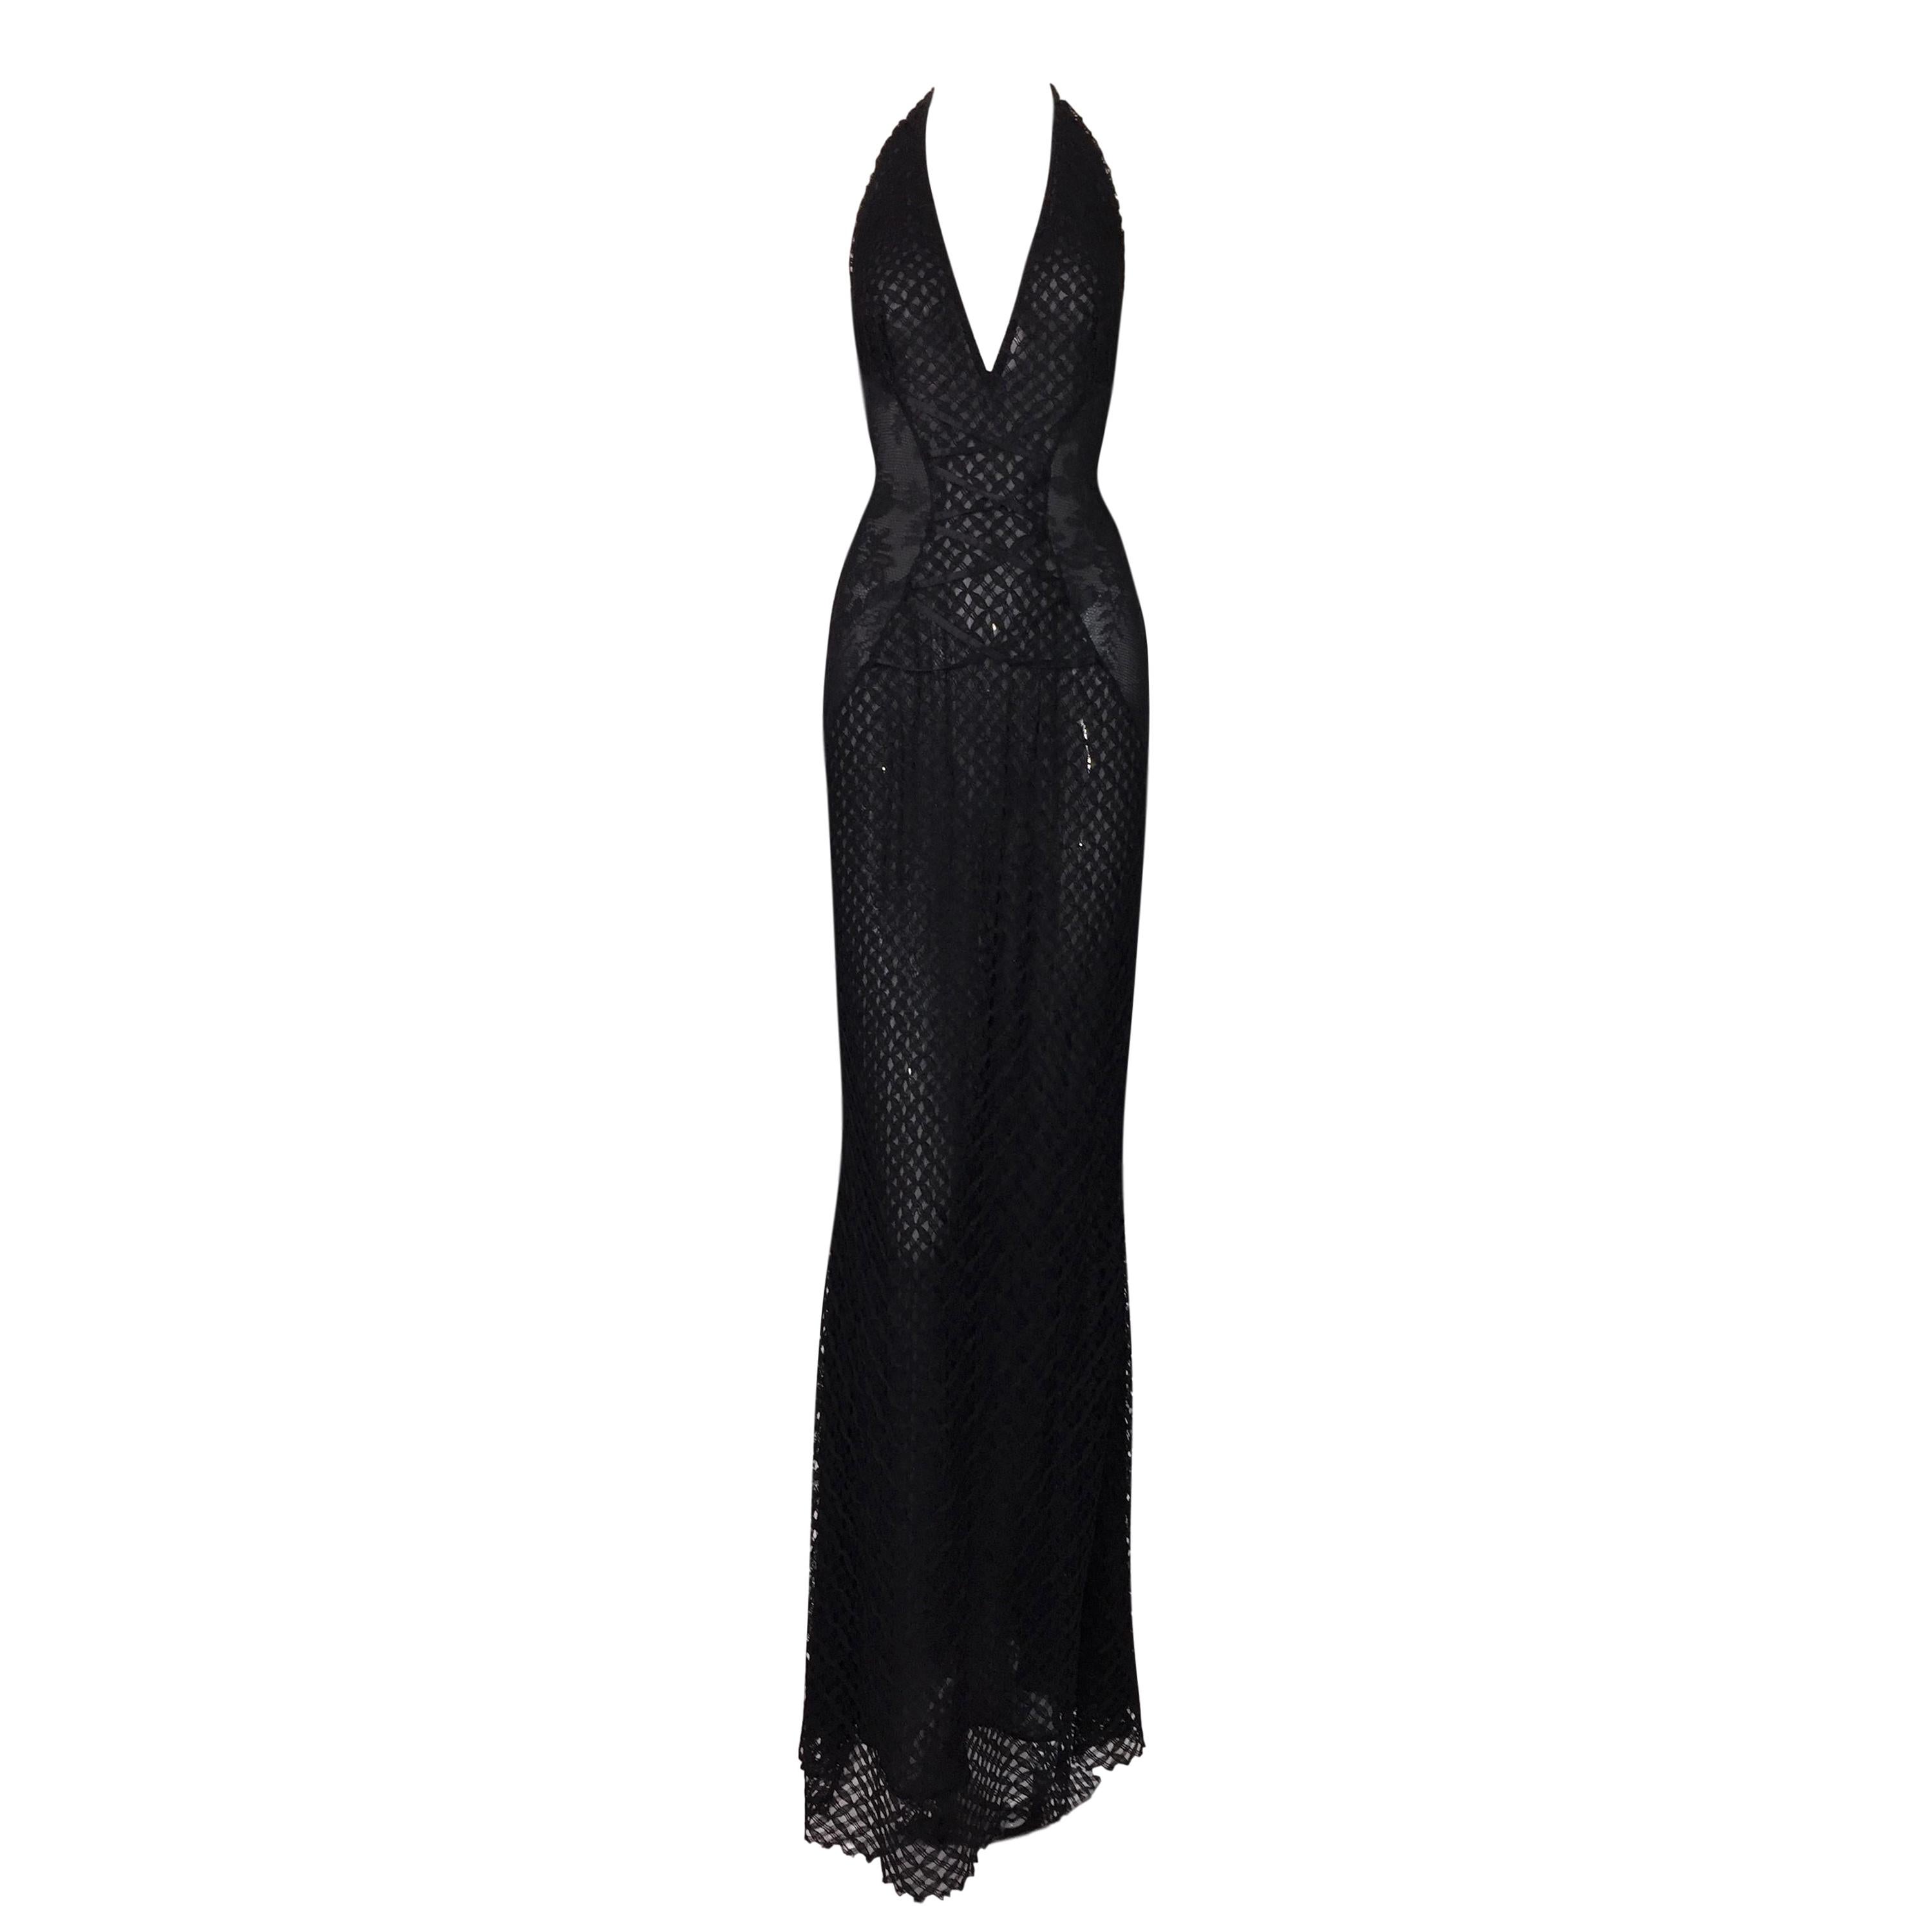 S/S 2002 Gianni Versace Sheer Black Lace Plunging Backless Halter Gown Dress 40